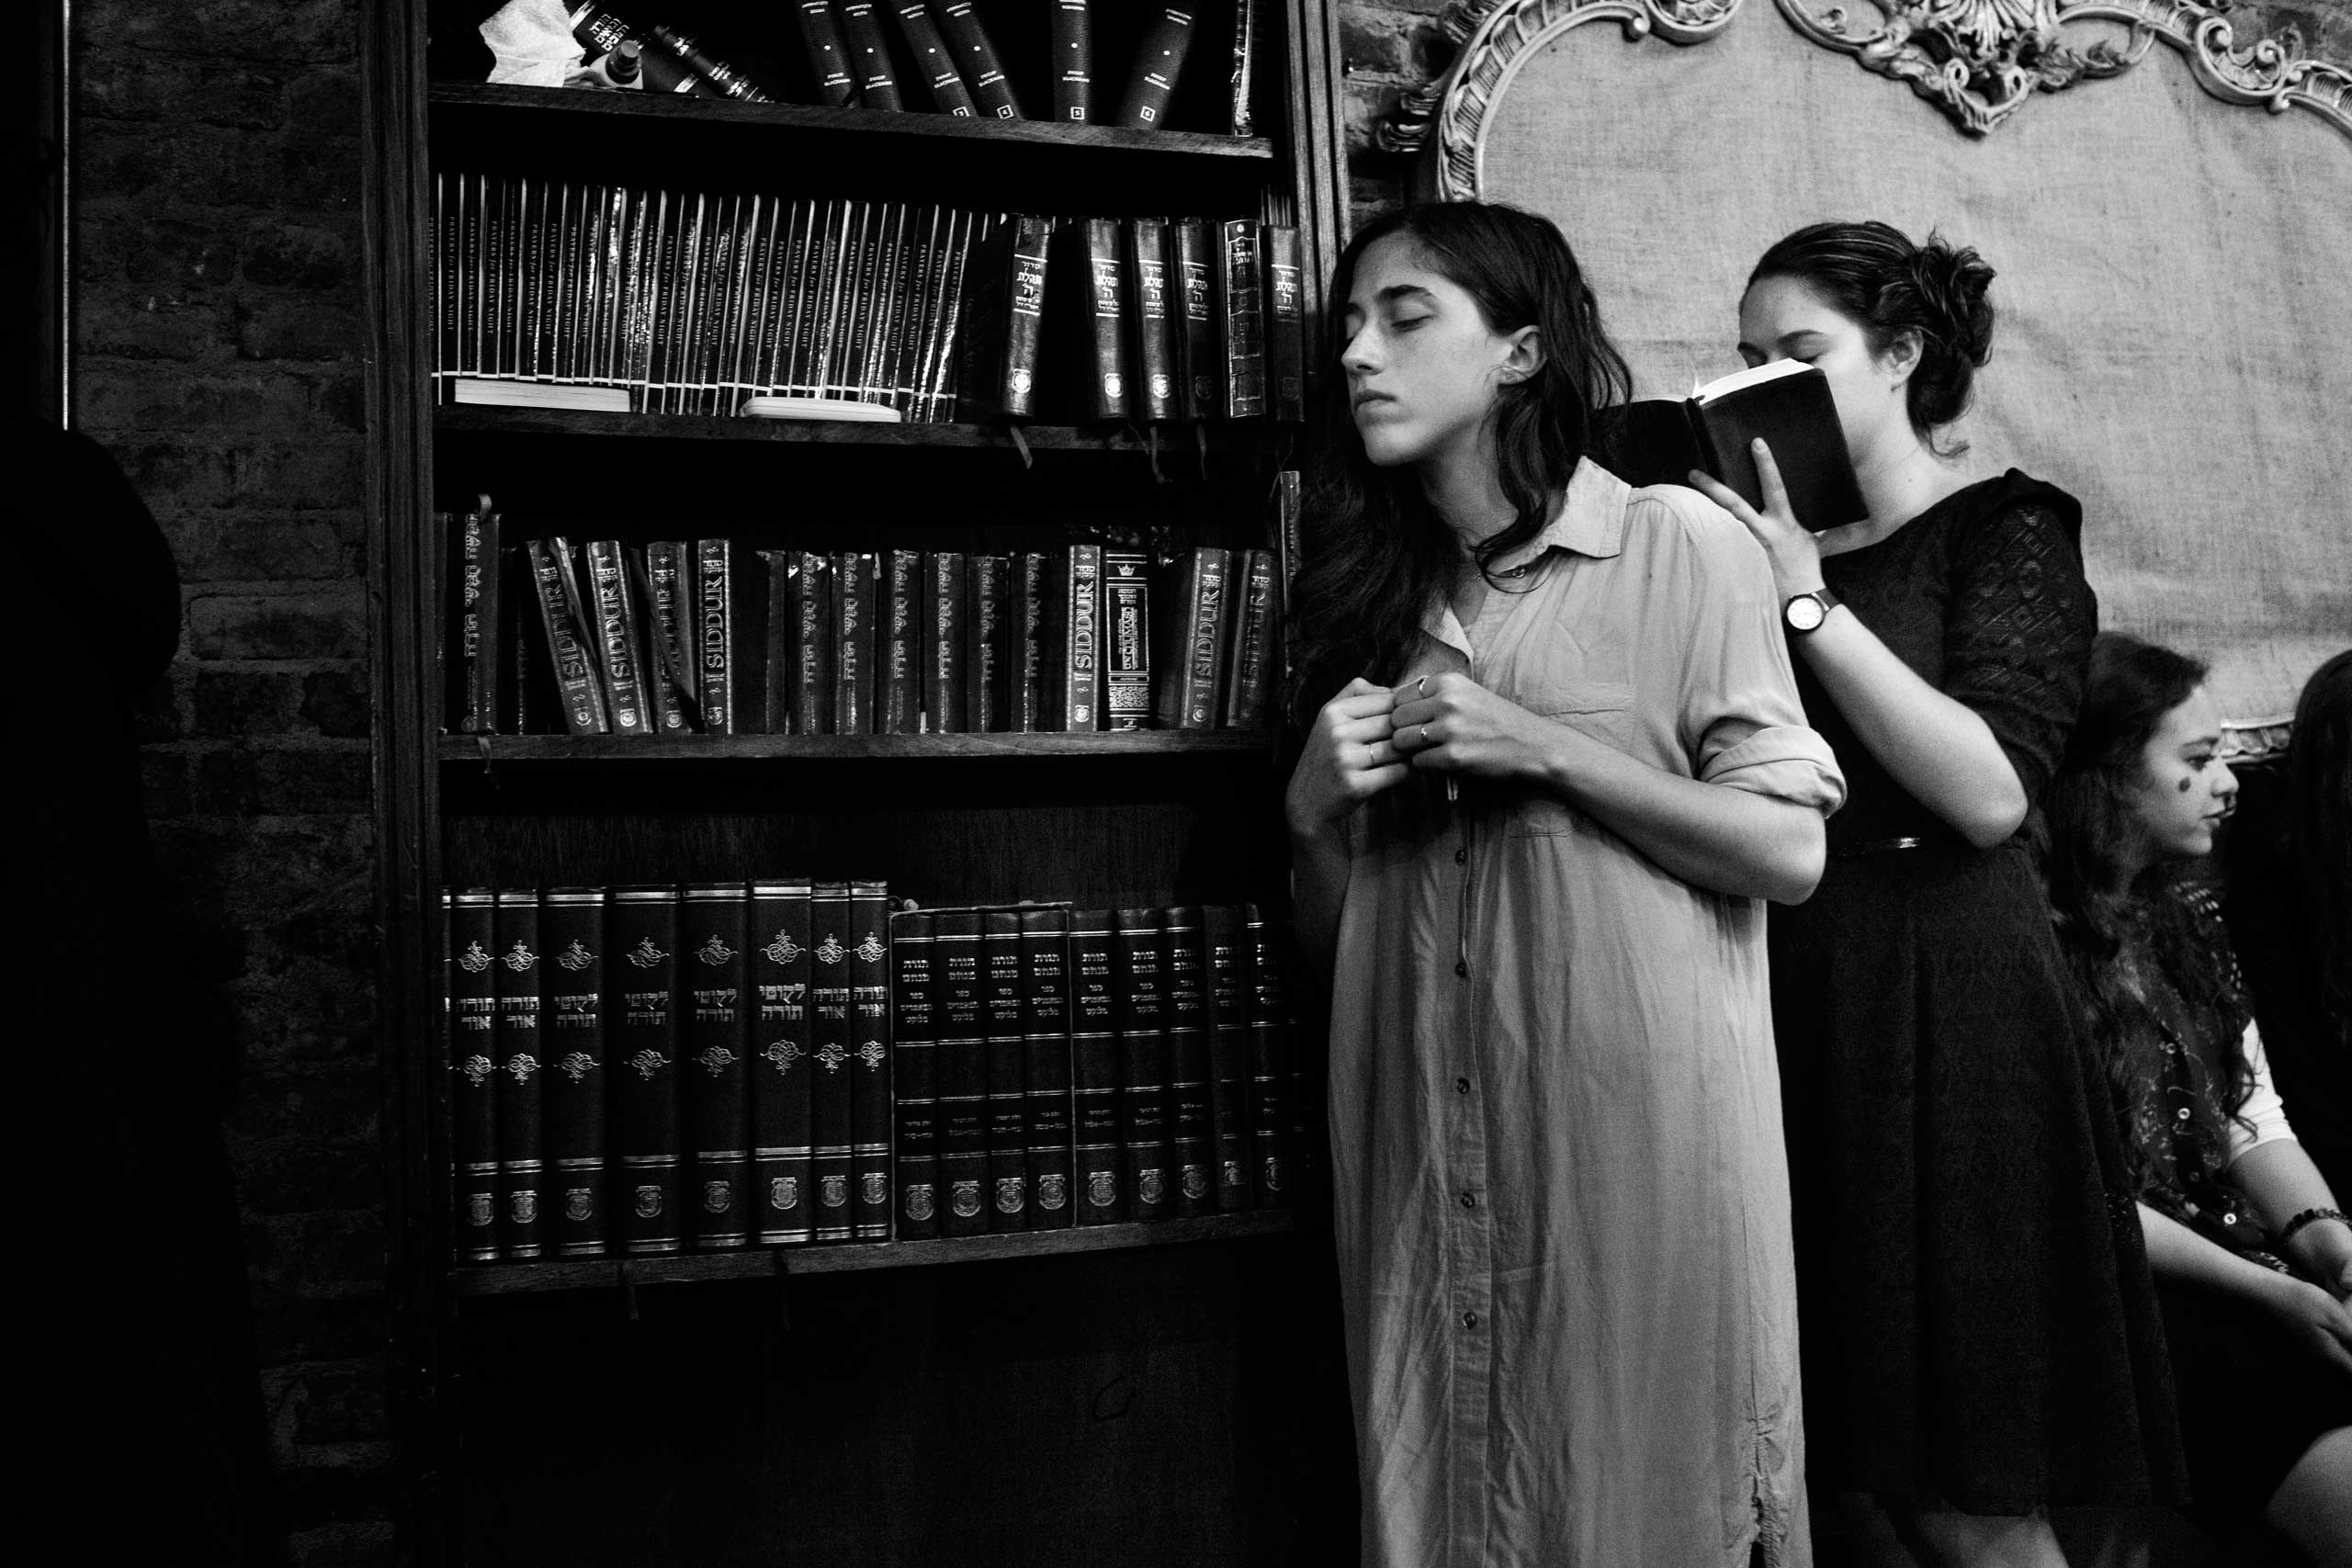 A young lady prays right before havdala, the ending cerimony of Shabbat, which welcomes back the new week in a synagogue in Crown Heights, Brooklyn. June 2013.